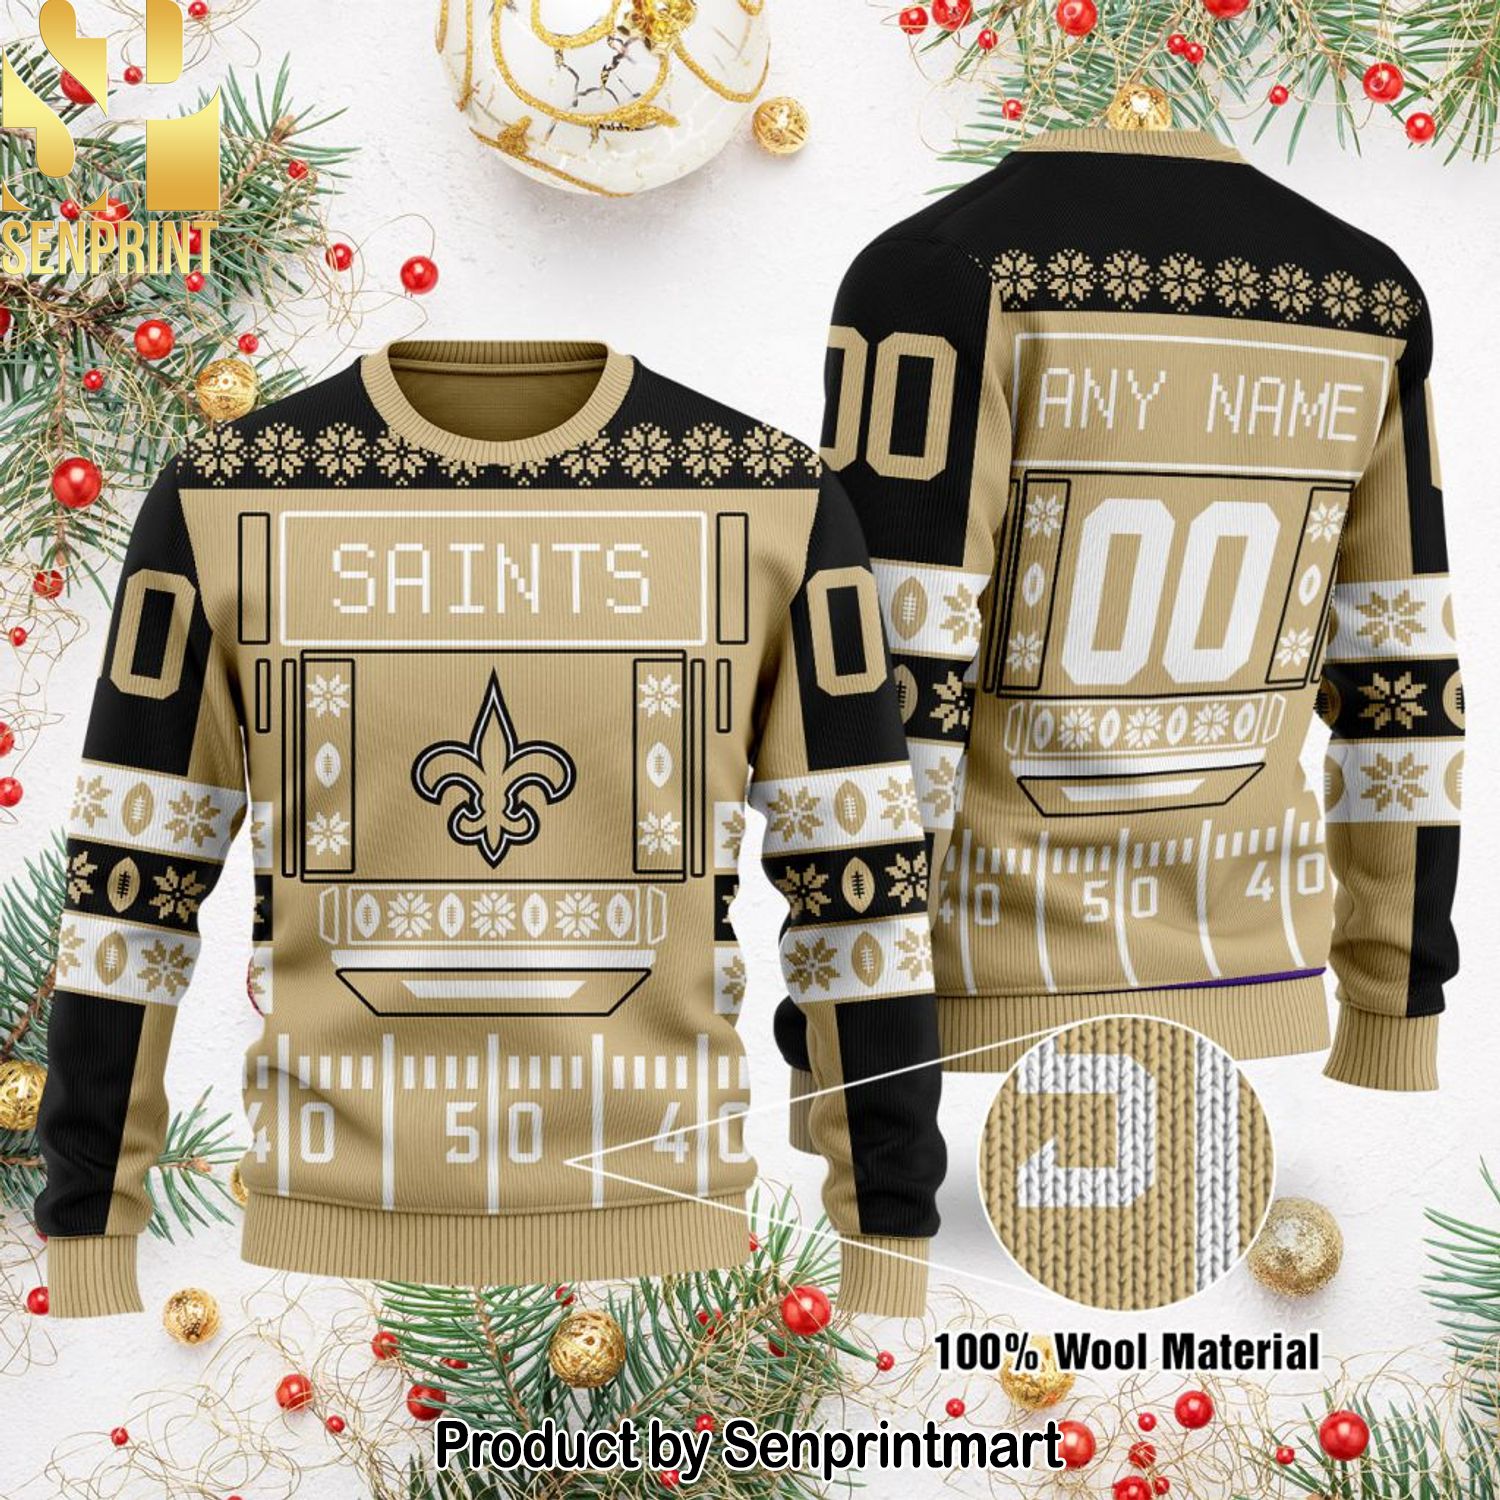 New Orleans Saints NFL 3D Printed Ugly Christmas Sweater